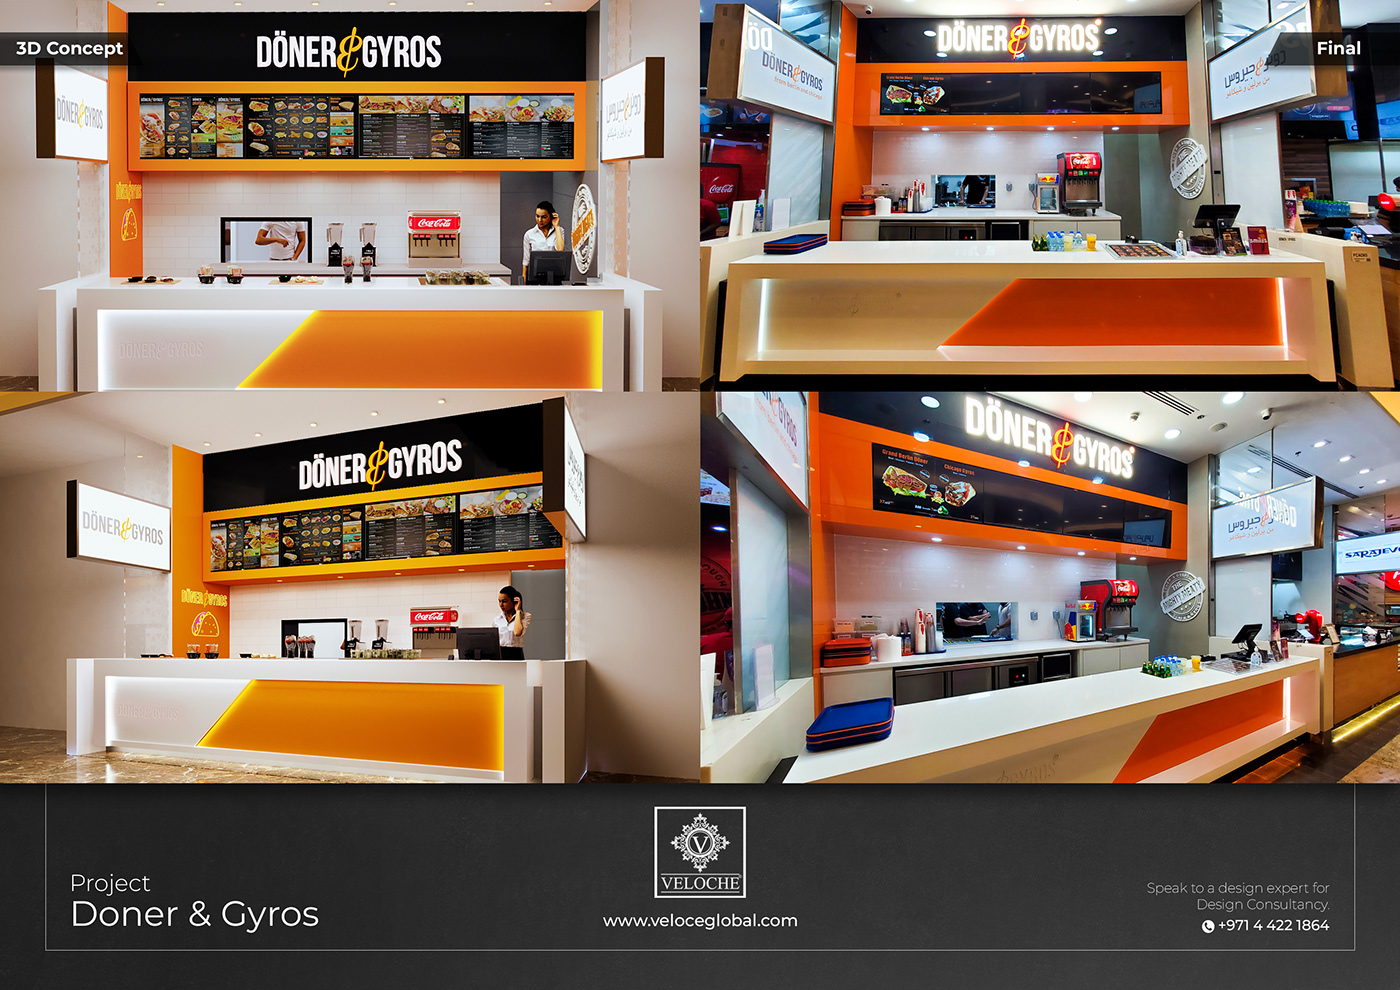 Doner & Gyros Interior Fit Out & Design Project done by Veloche Interior and Exhibition